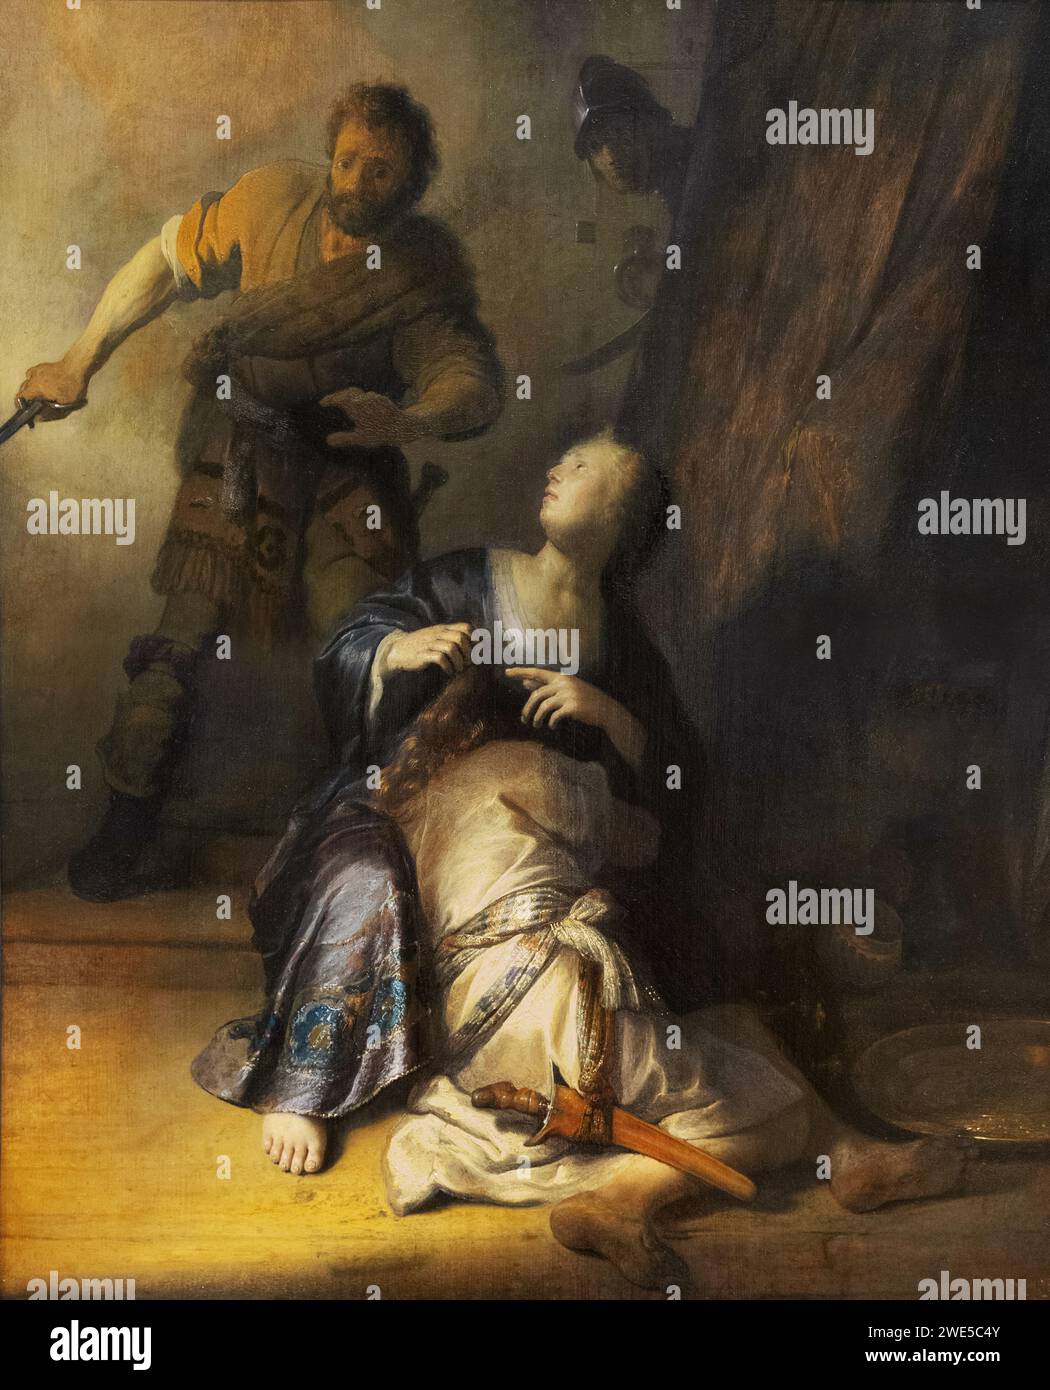 Rembrandt van Rijn, or Rembrandt painting; 'Samson and Delilah' 1628; Dutch Golden Age painting of a biblical story. 17th century art. Stock Photo